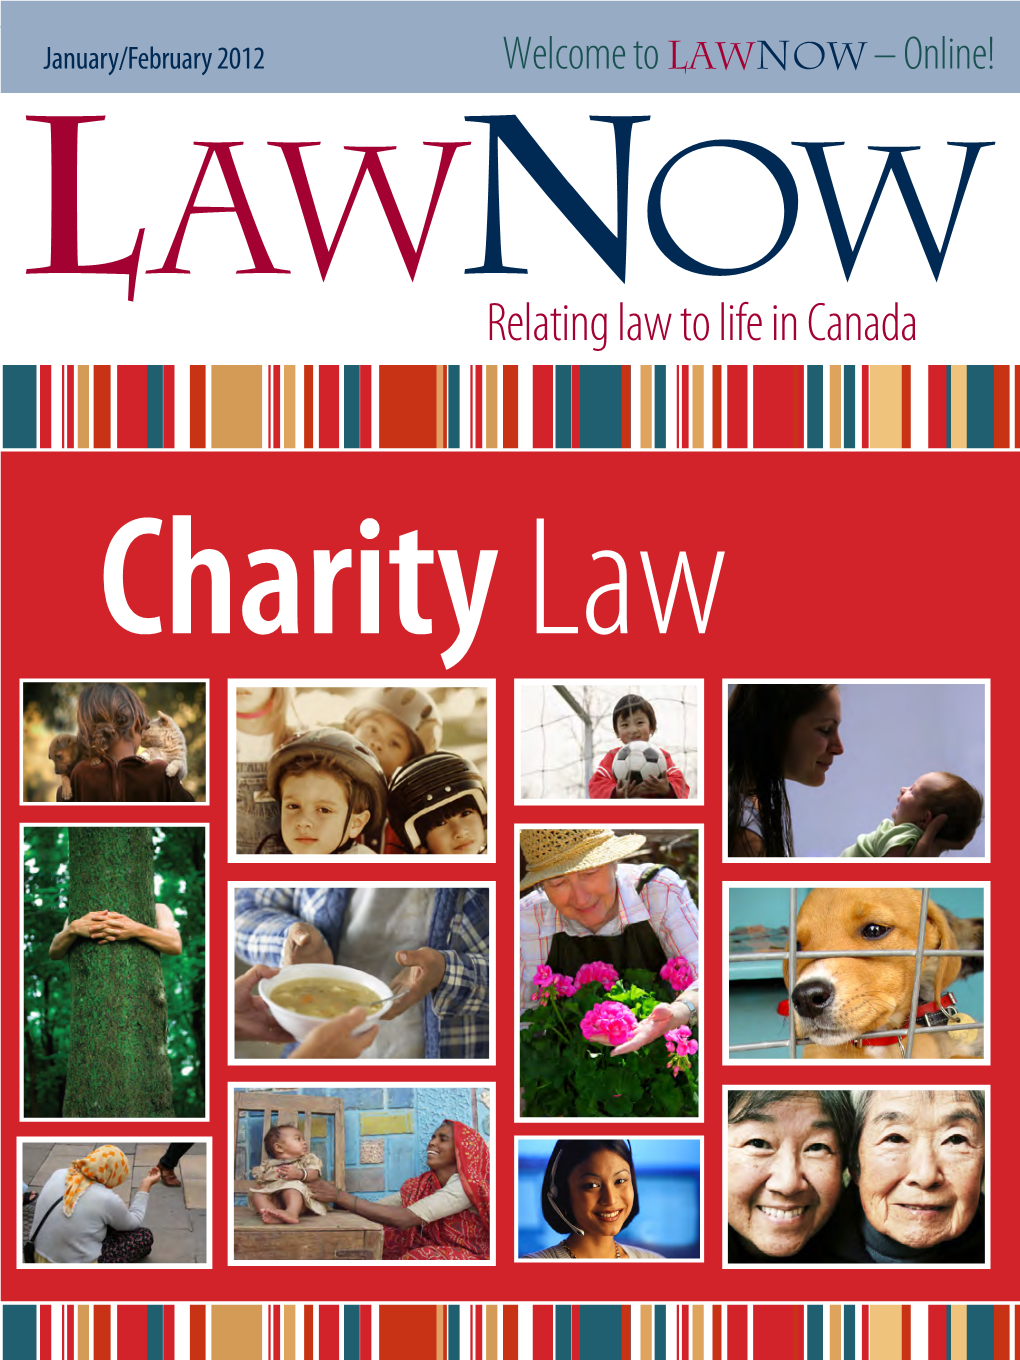 Relating Law to Life in Canada Charity Law Contents January/February 2012